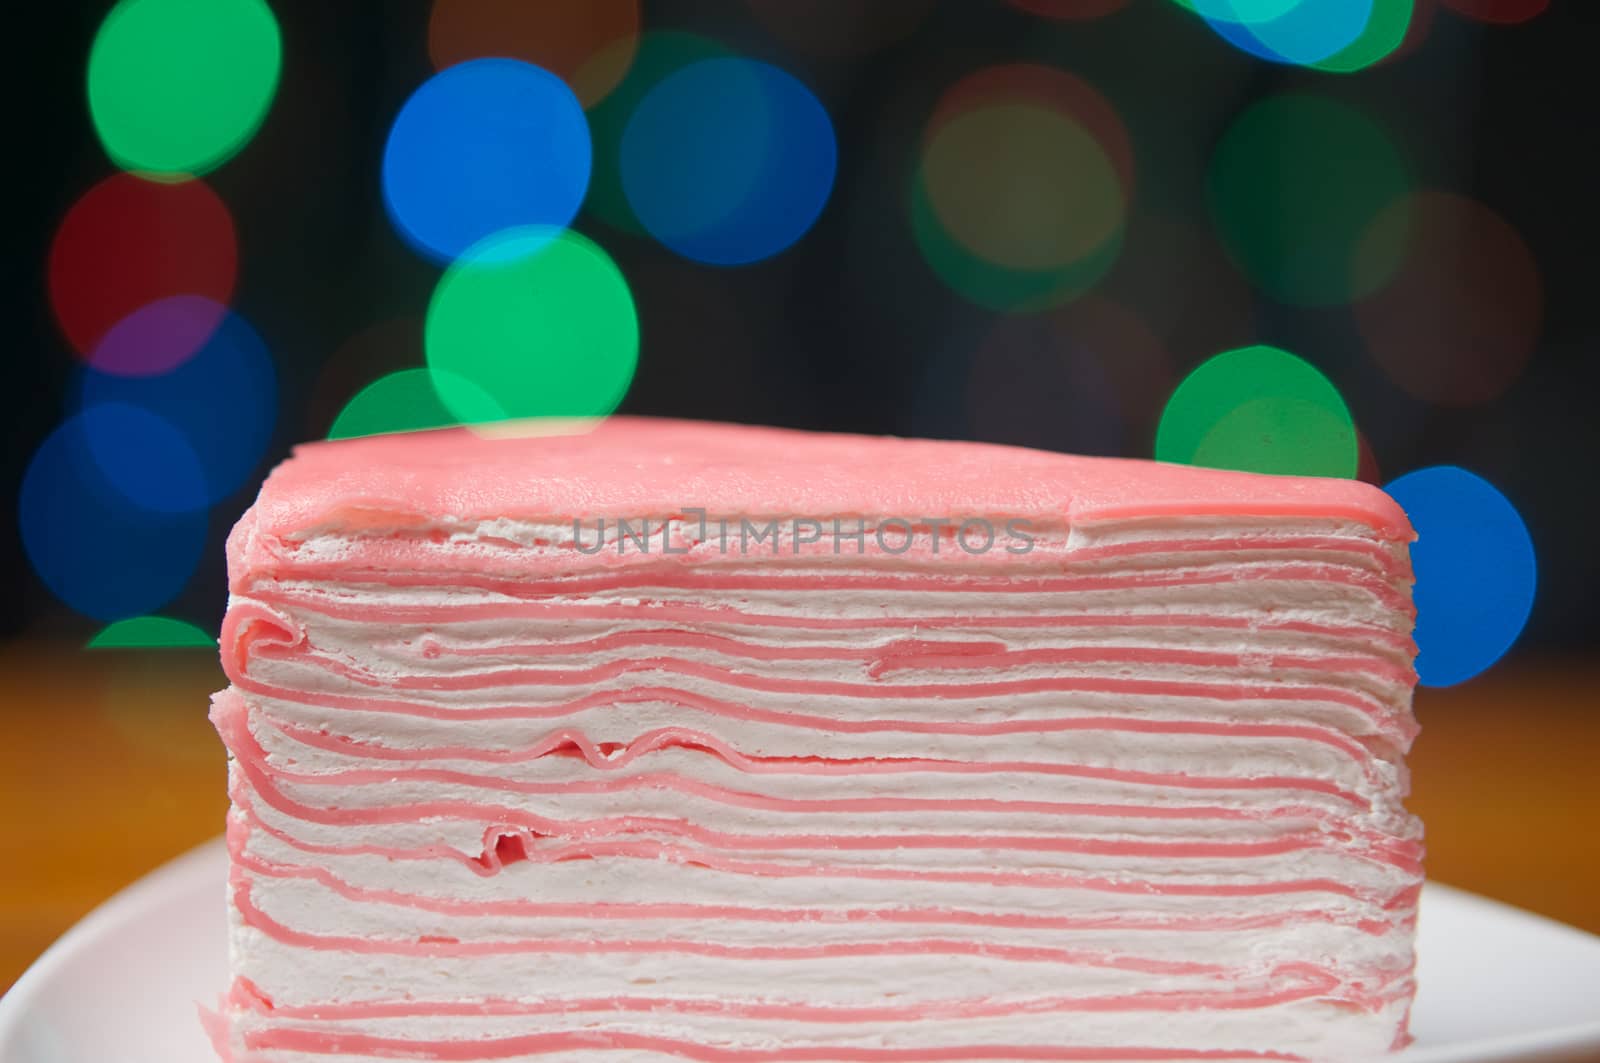 Crepe cake on white plate with wood table have colorful bokeh as background.